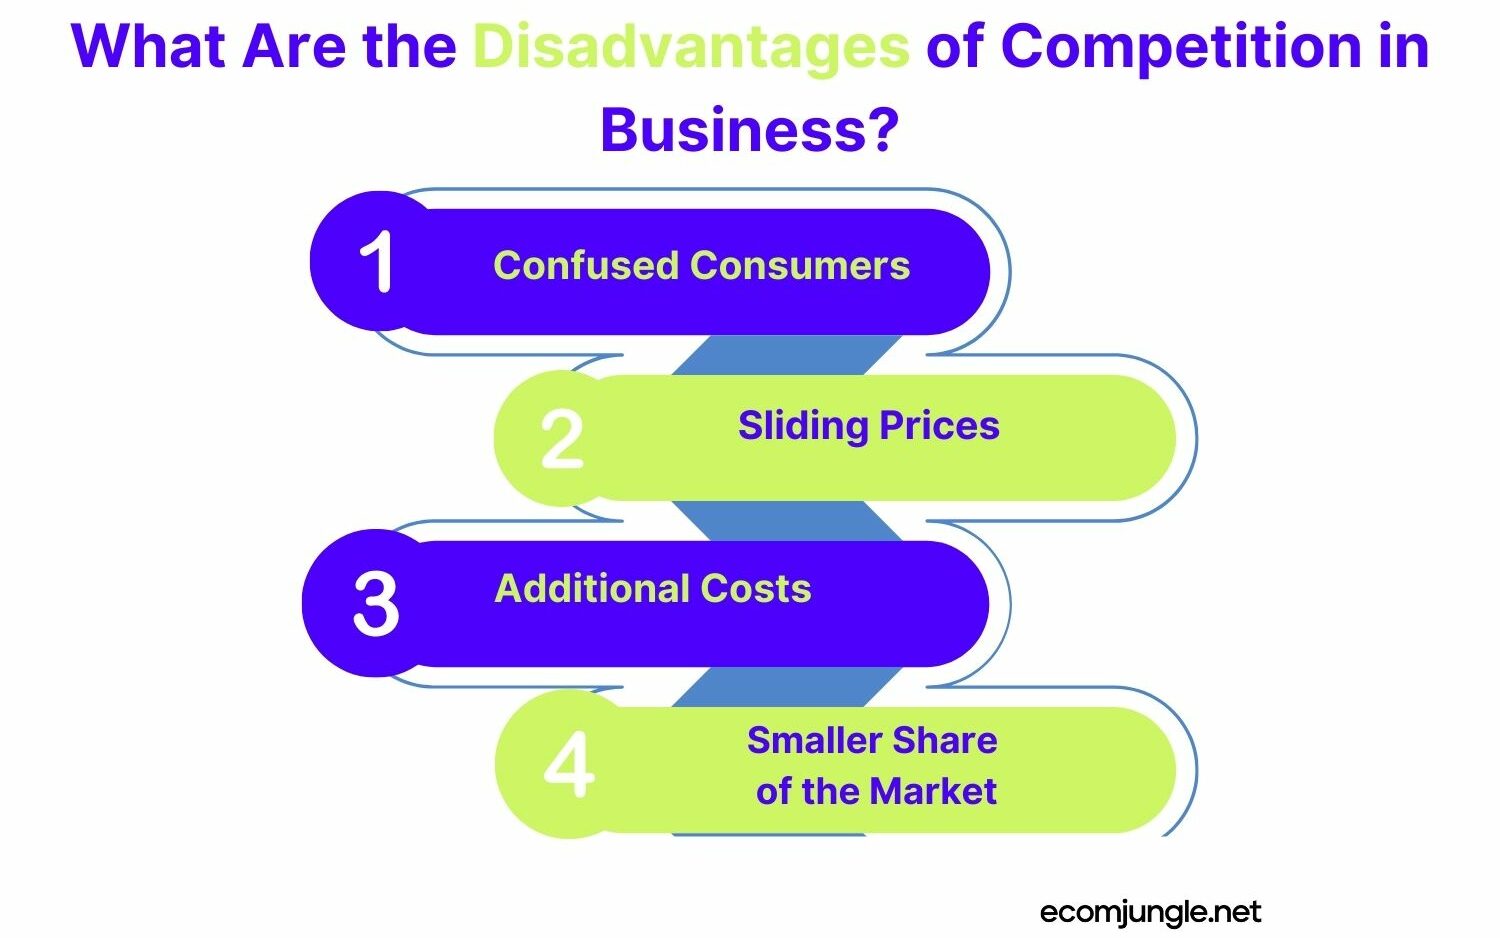 Competition can bring many benefits to businesses, but it can also bring some disadvantages. 